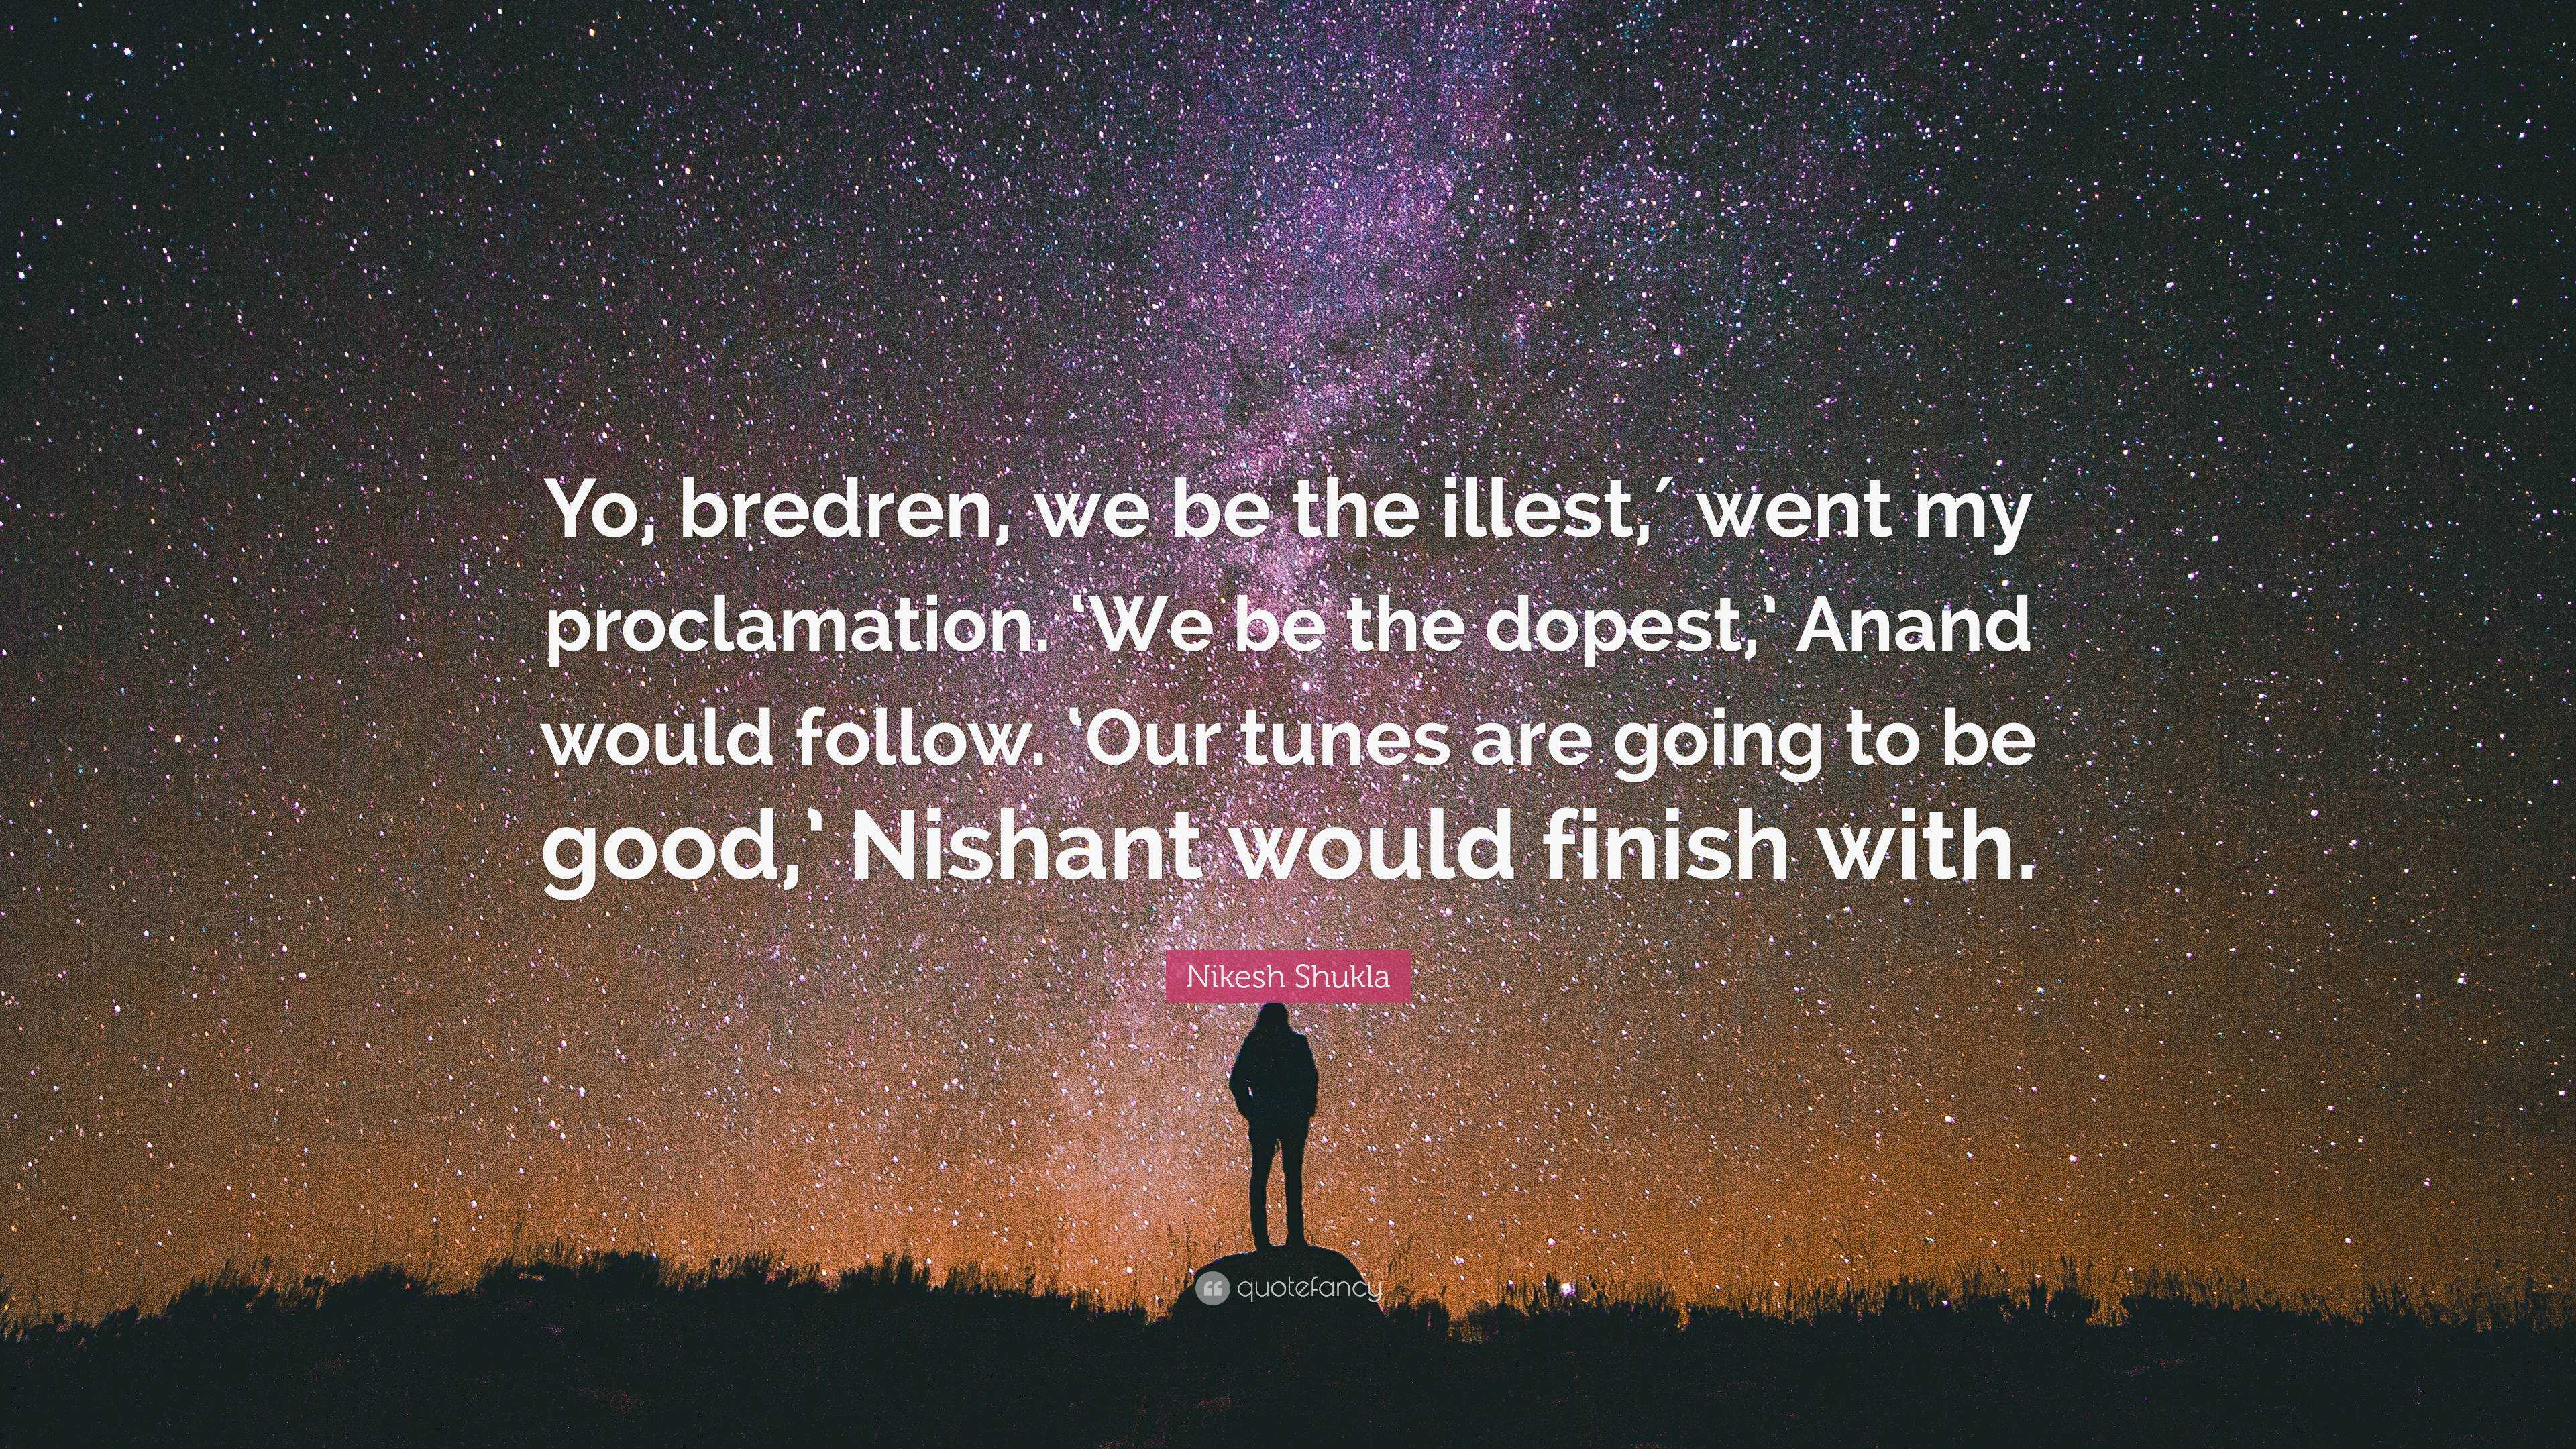 Nikesh Shukla Quote: “It's a tree falling in a forest conundrum